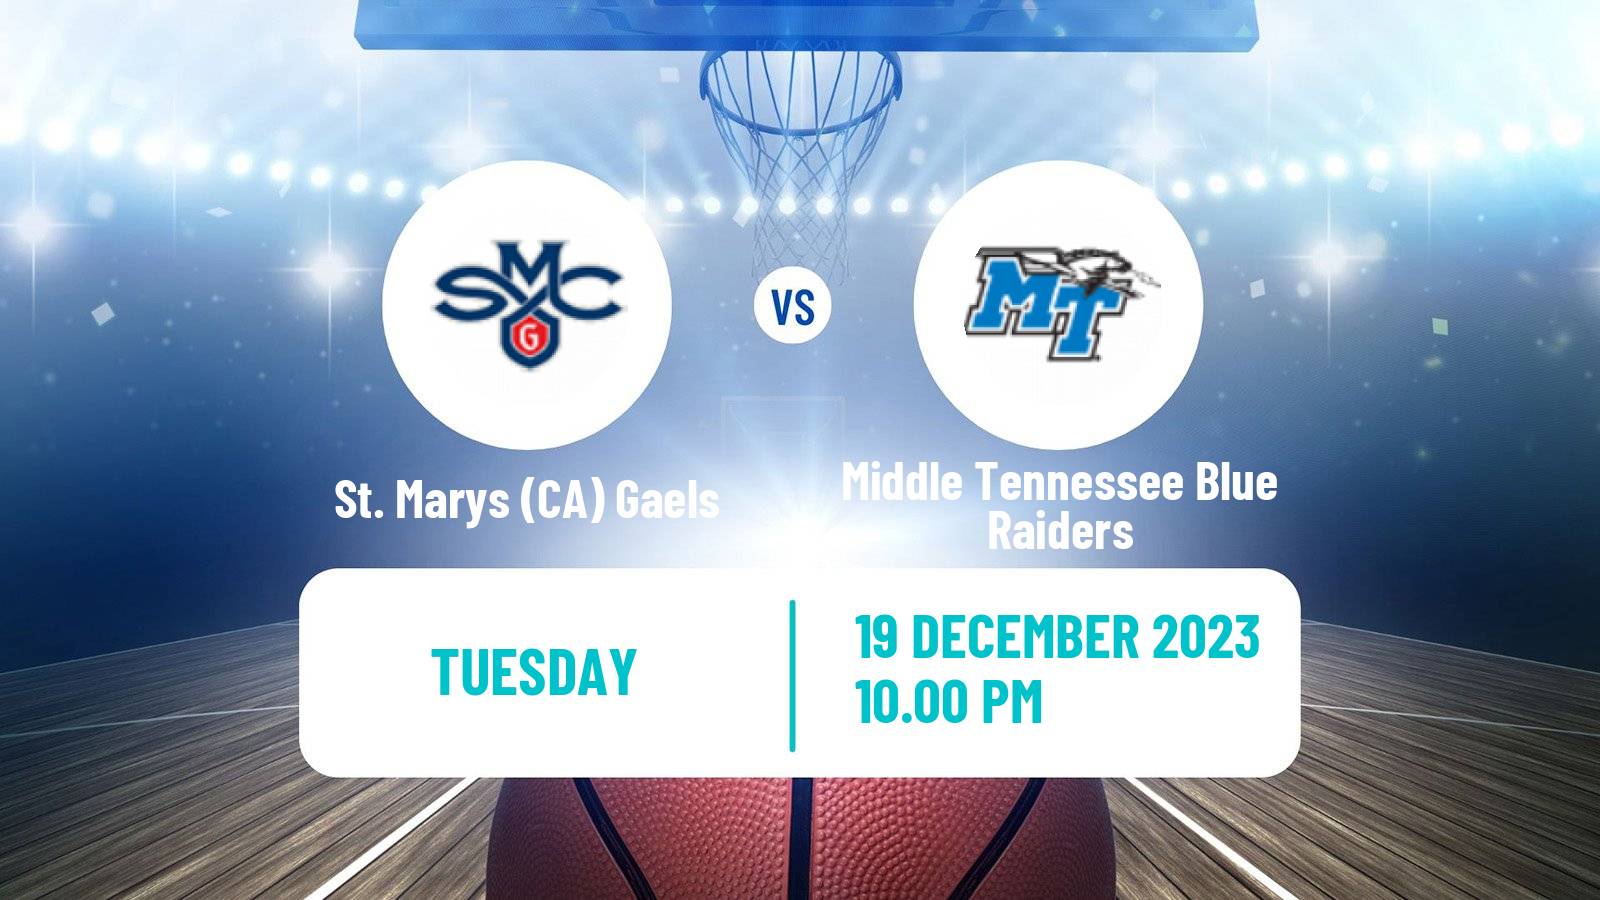 Basketball NCAA College Basketball St. Marys (CA) Gaels - Middle Tennessee Blue Raiders